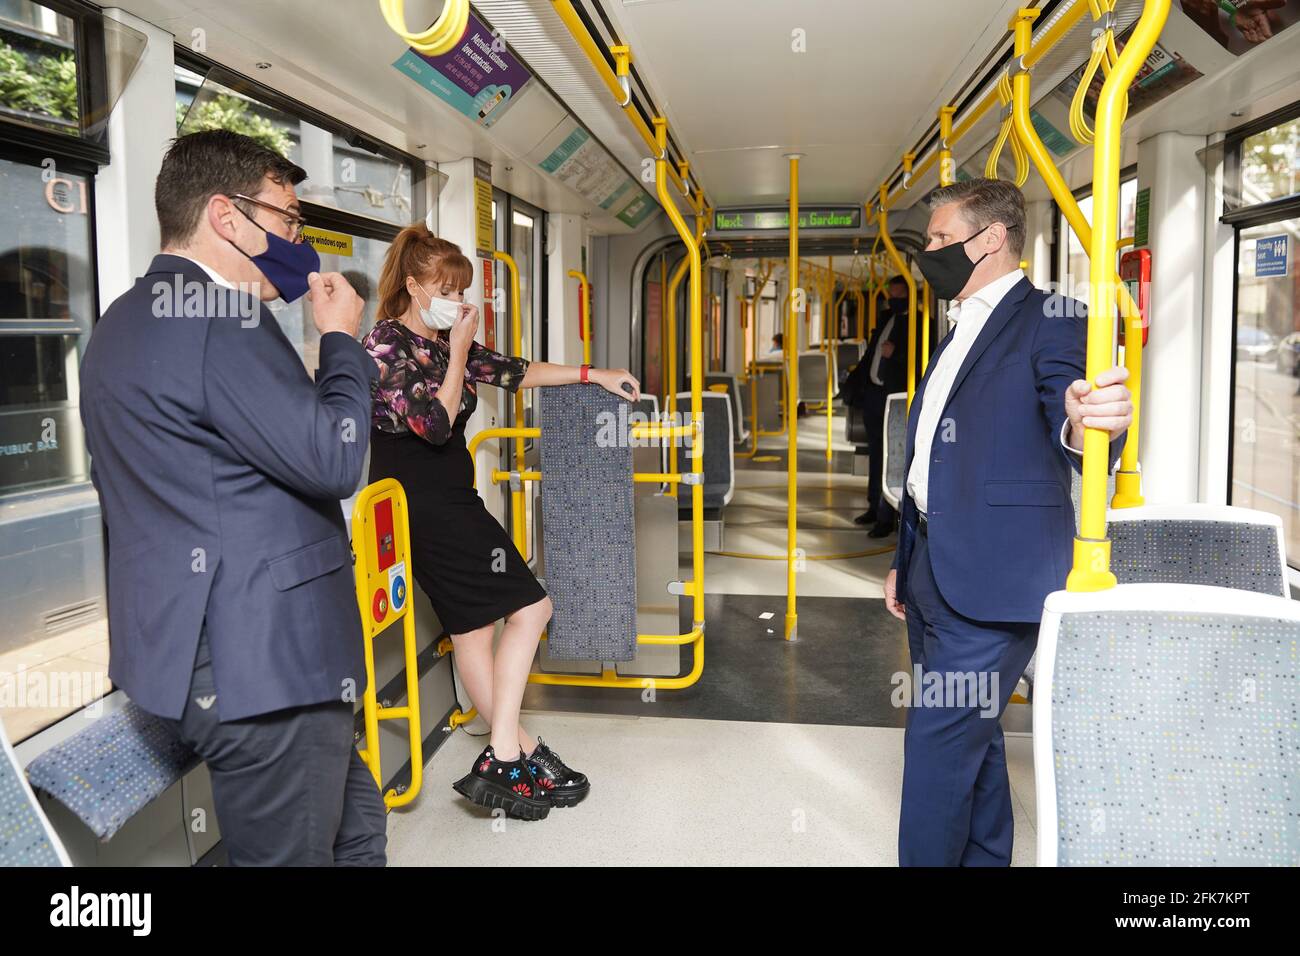 Labour leader Keir Starmer with Labour's Metro Mayor Andy Burnham and deputy leader of the Labour Party Angela Rayner, travel on a Metrolink tram, during a visit to Manchester. Picture date: Thursday April 29, 2021. Stock Photo